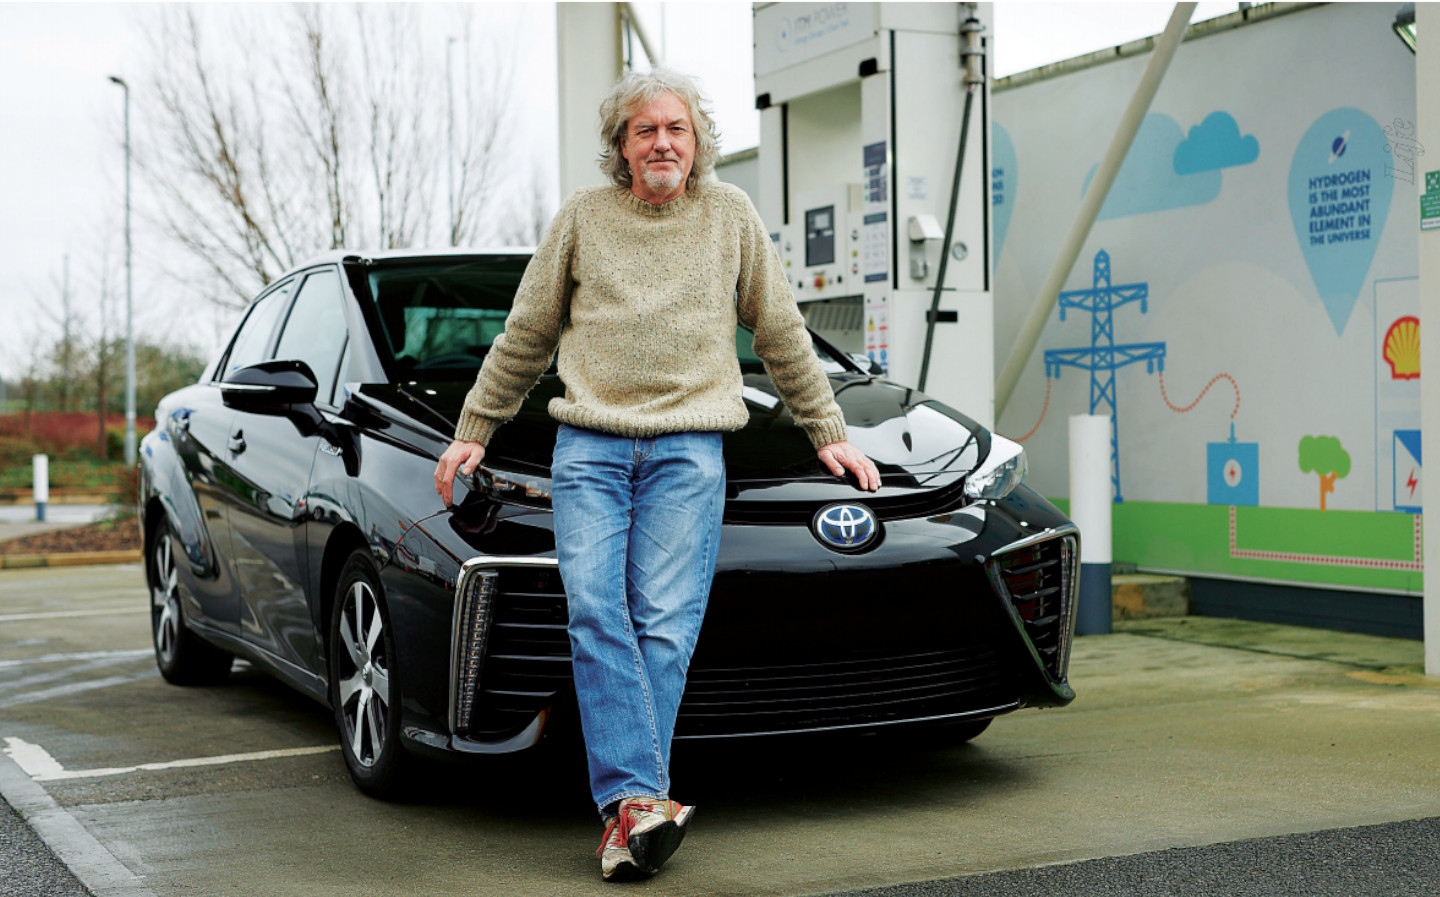 James May has written a hydrogen manifesto instead of reviewing his Toyota Mirai